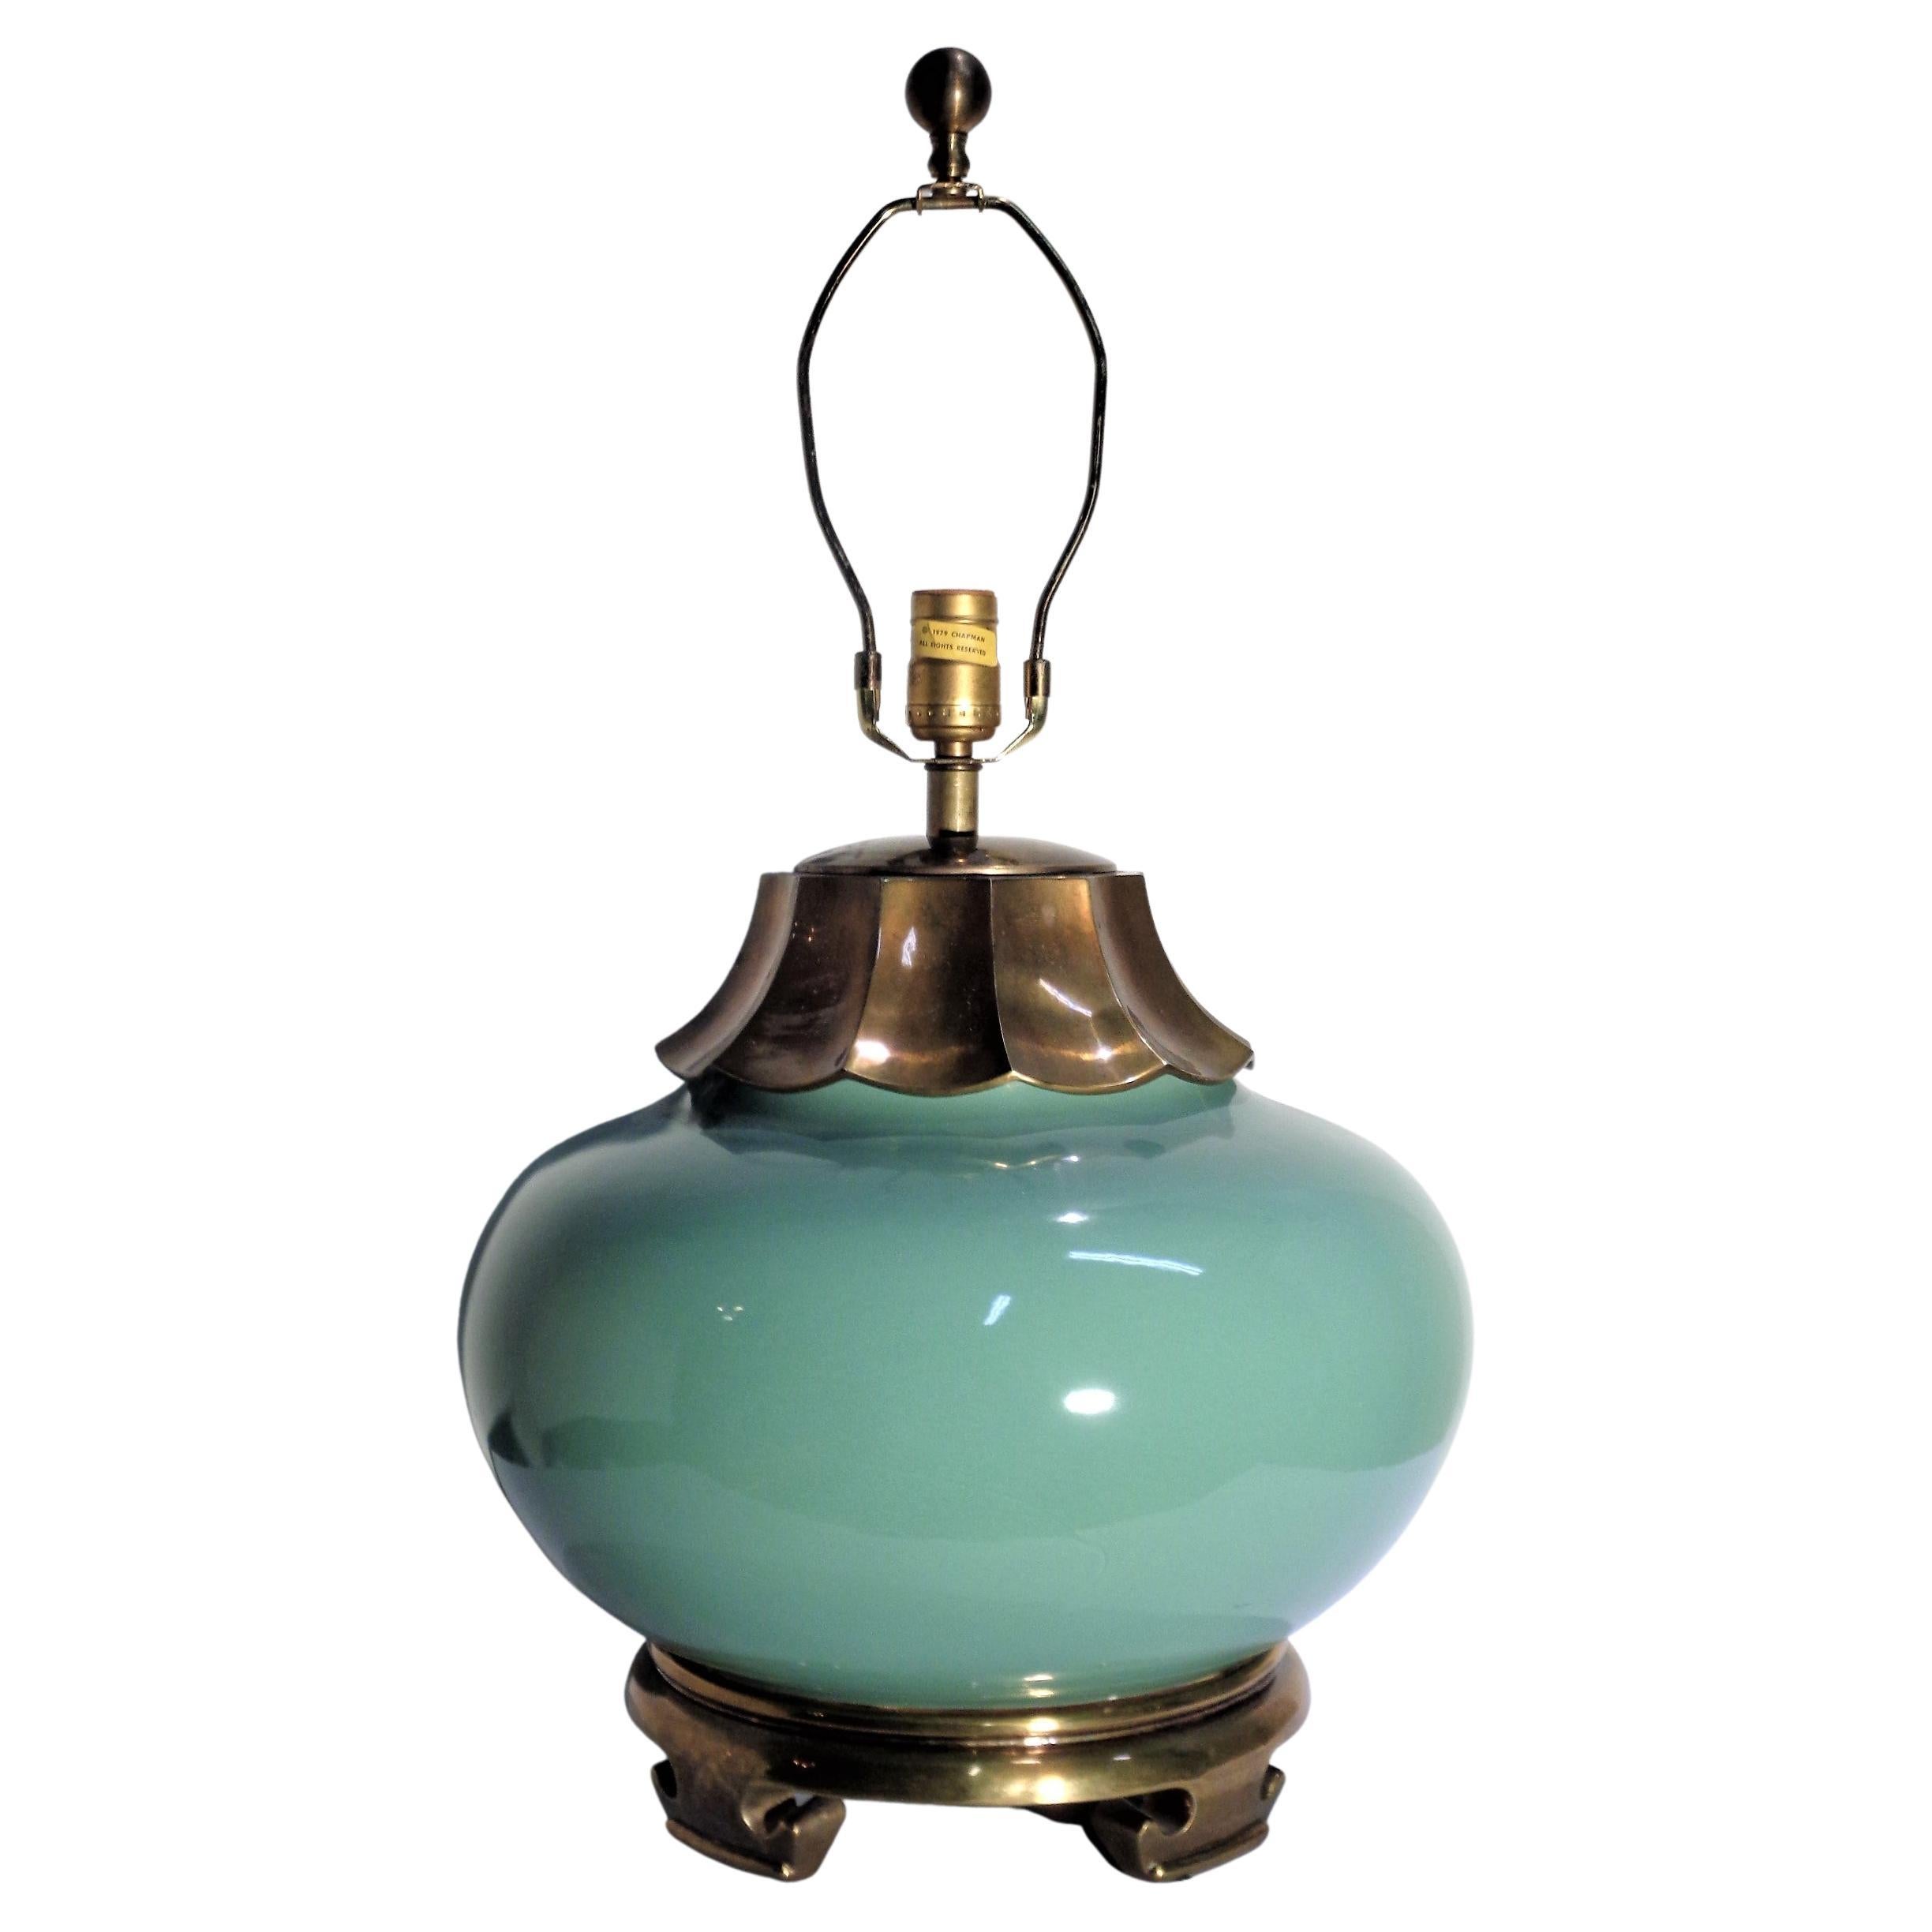 Glamorous Asian Modern Ming style large scale bulbous form high glazed celadon turquoise blue porcelain ceramic table lamp with patinated brass bronzed metal mounts. Original Chapman paper label at top shaft - dated 1979. Beautiful lamp. Look at all